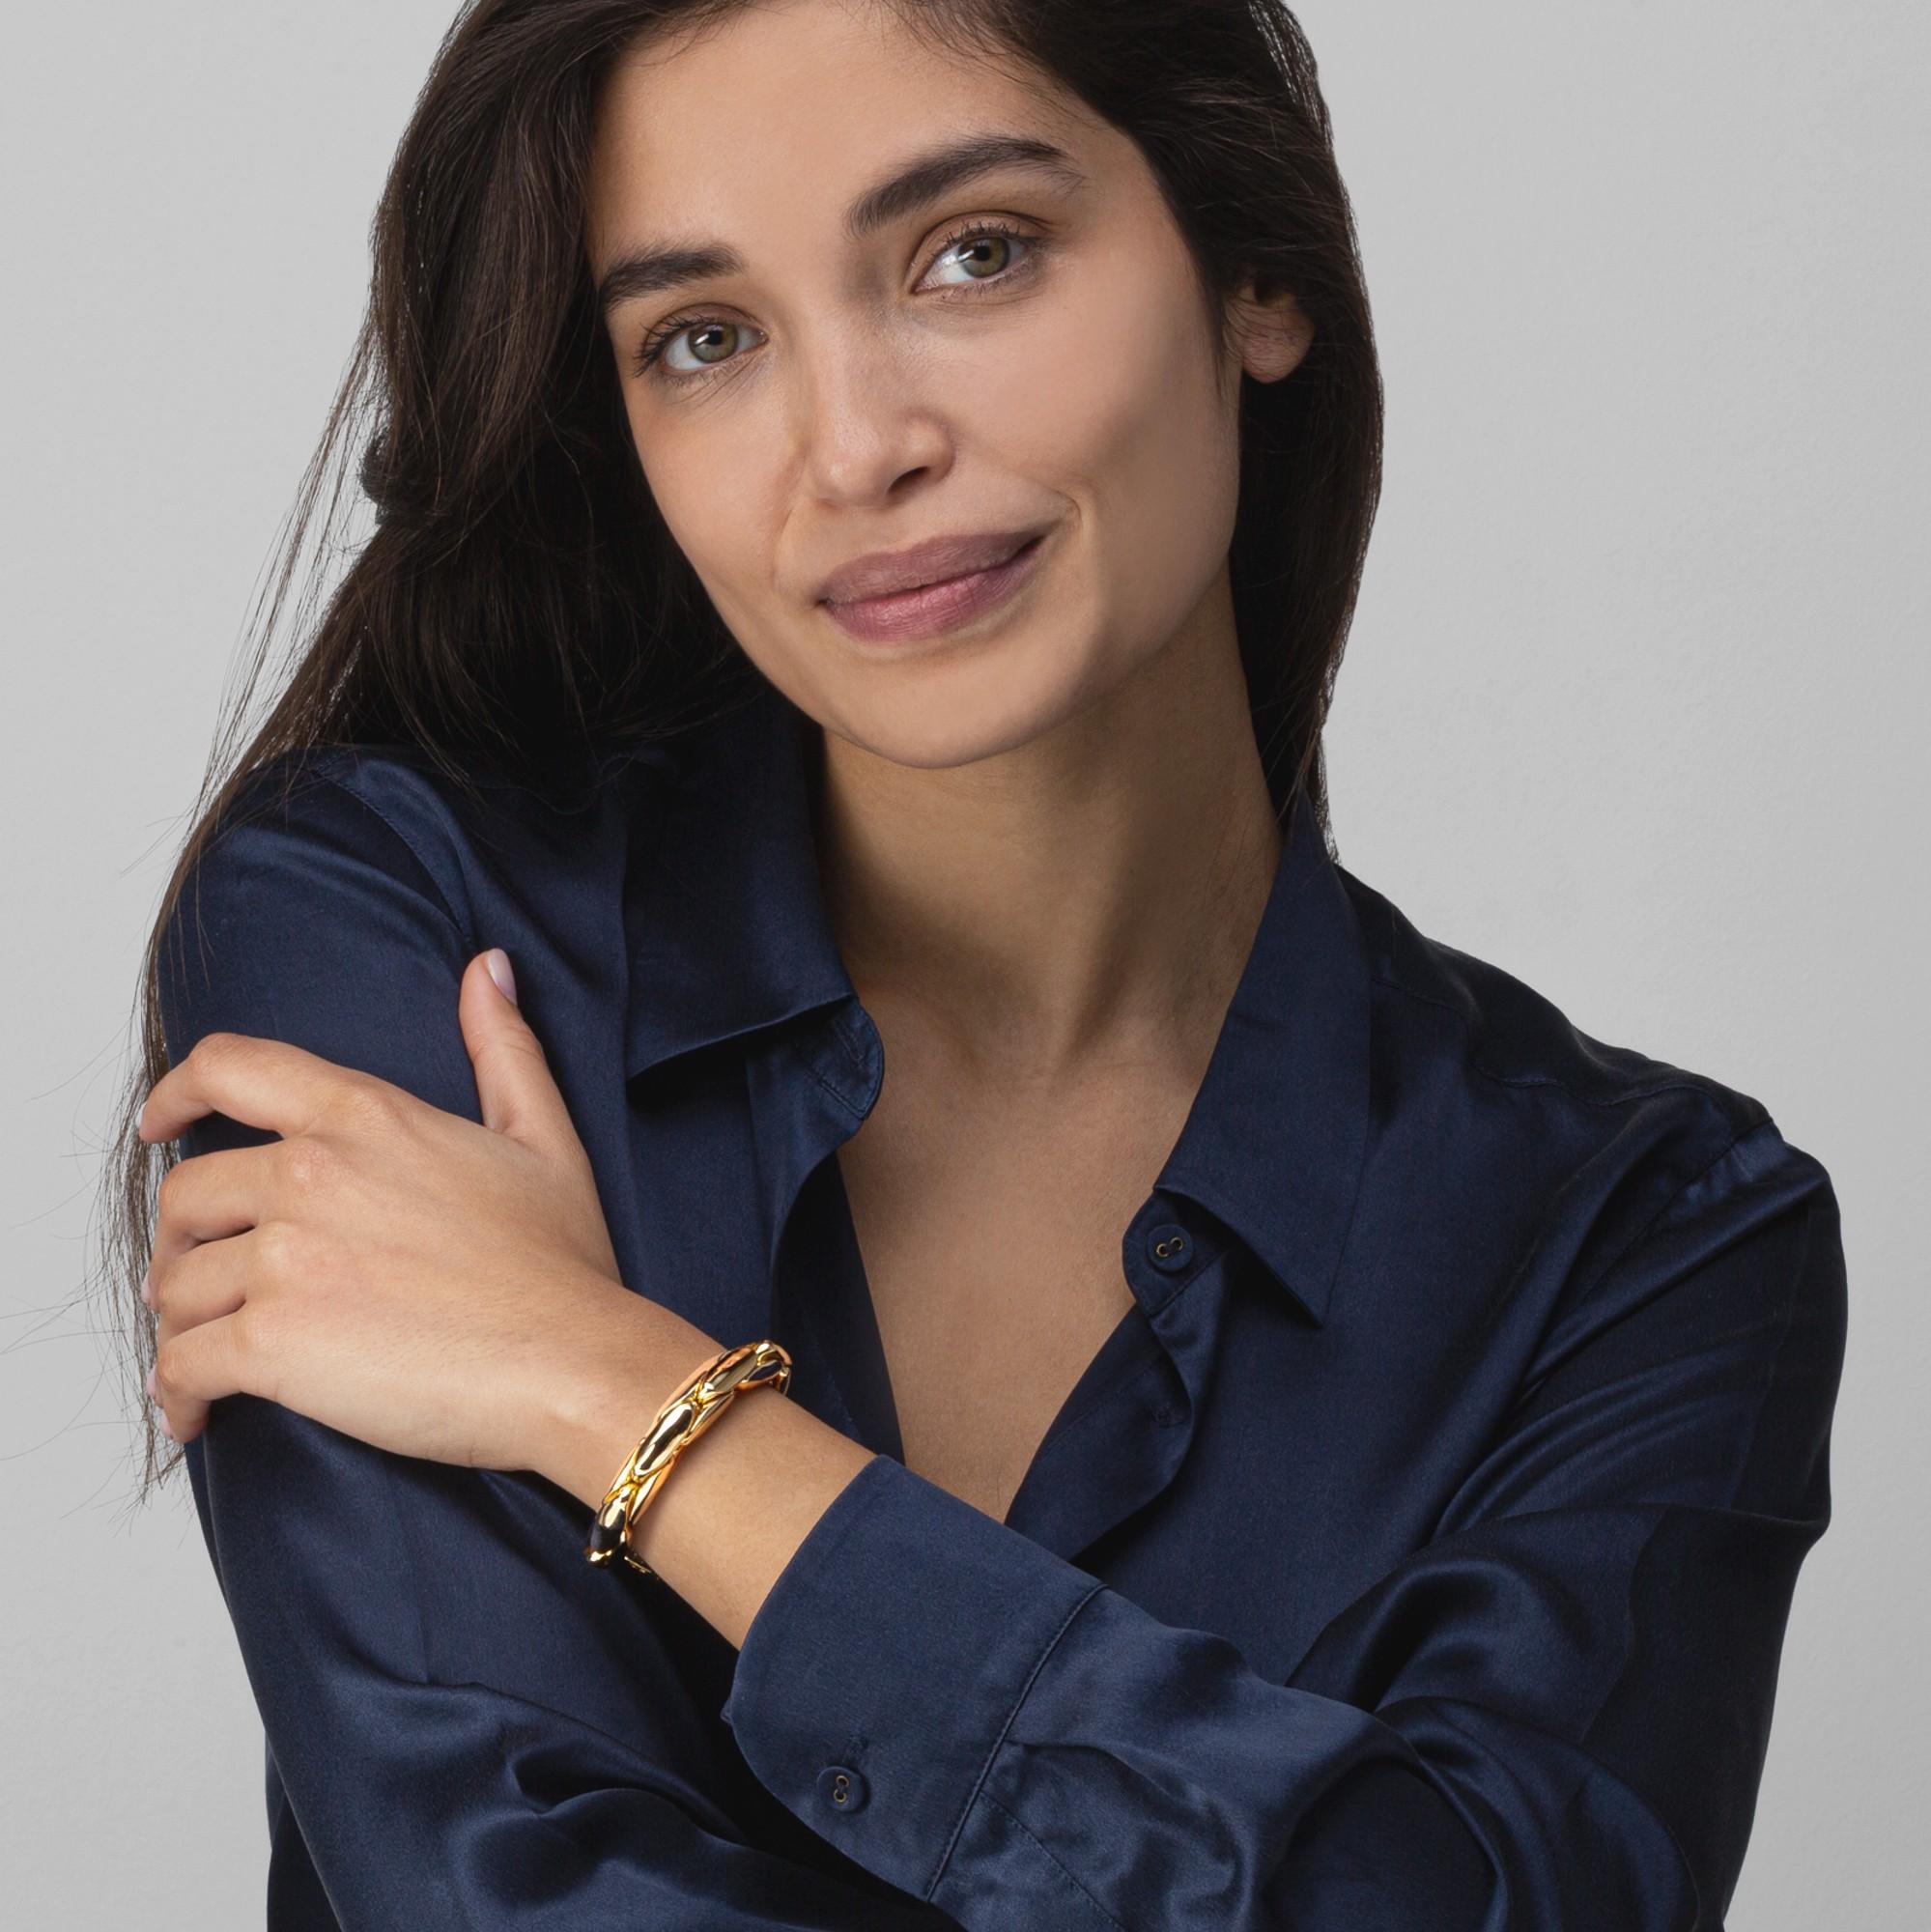 Alex Jona design collection, hand crafted in Italy, 18 karat yellow gold, flexible link bracelet.

Alex Jona jewels stand out, not only for their special design and for the excellent quality of the gemstones, but also for the careful attention given